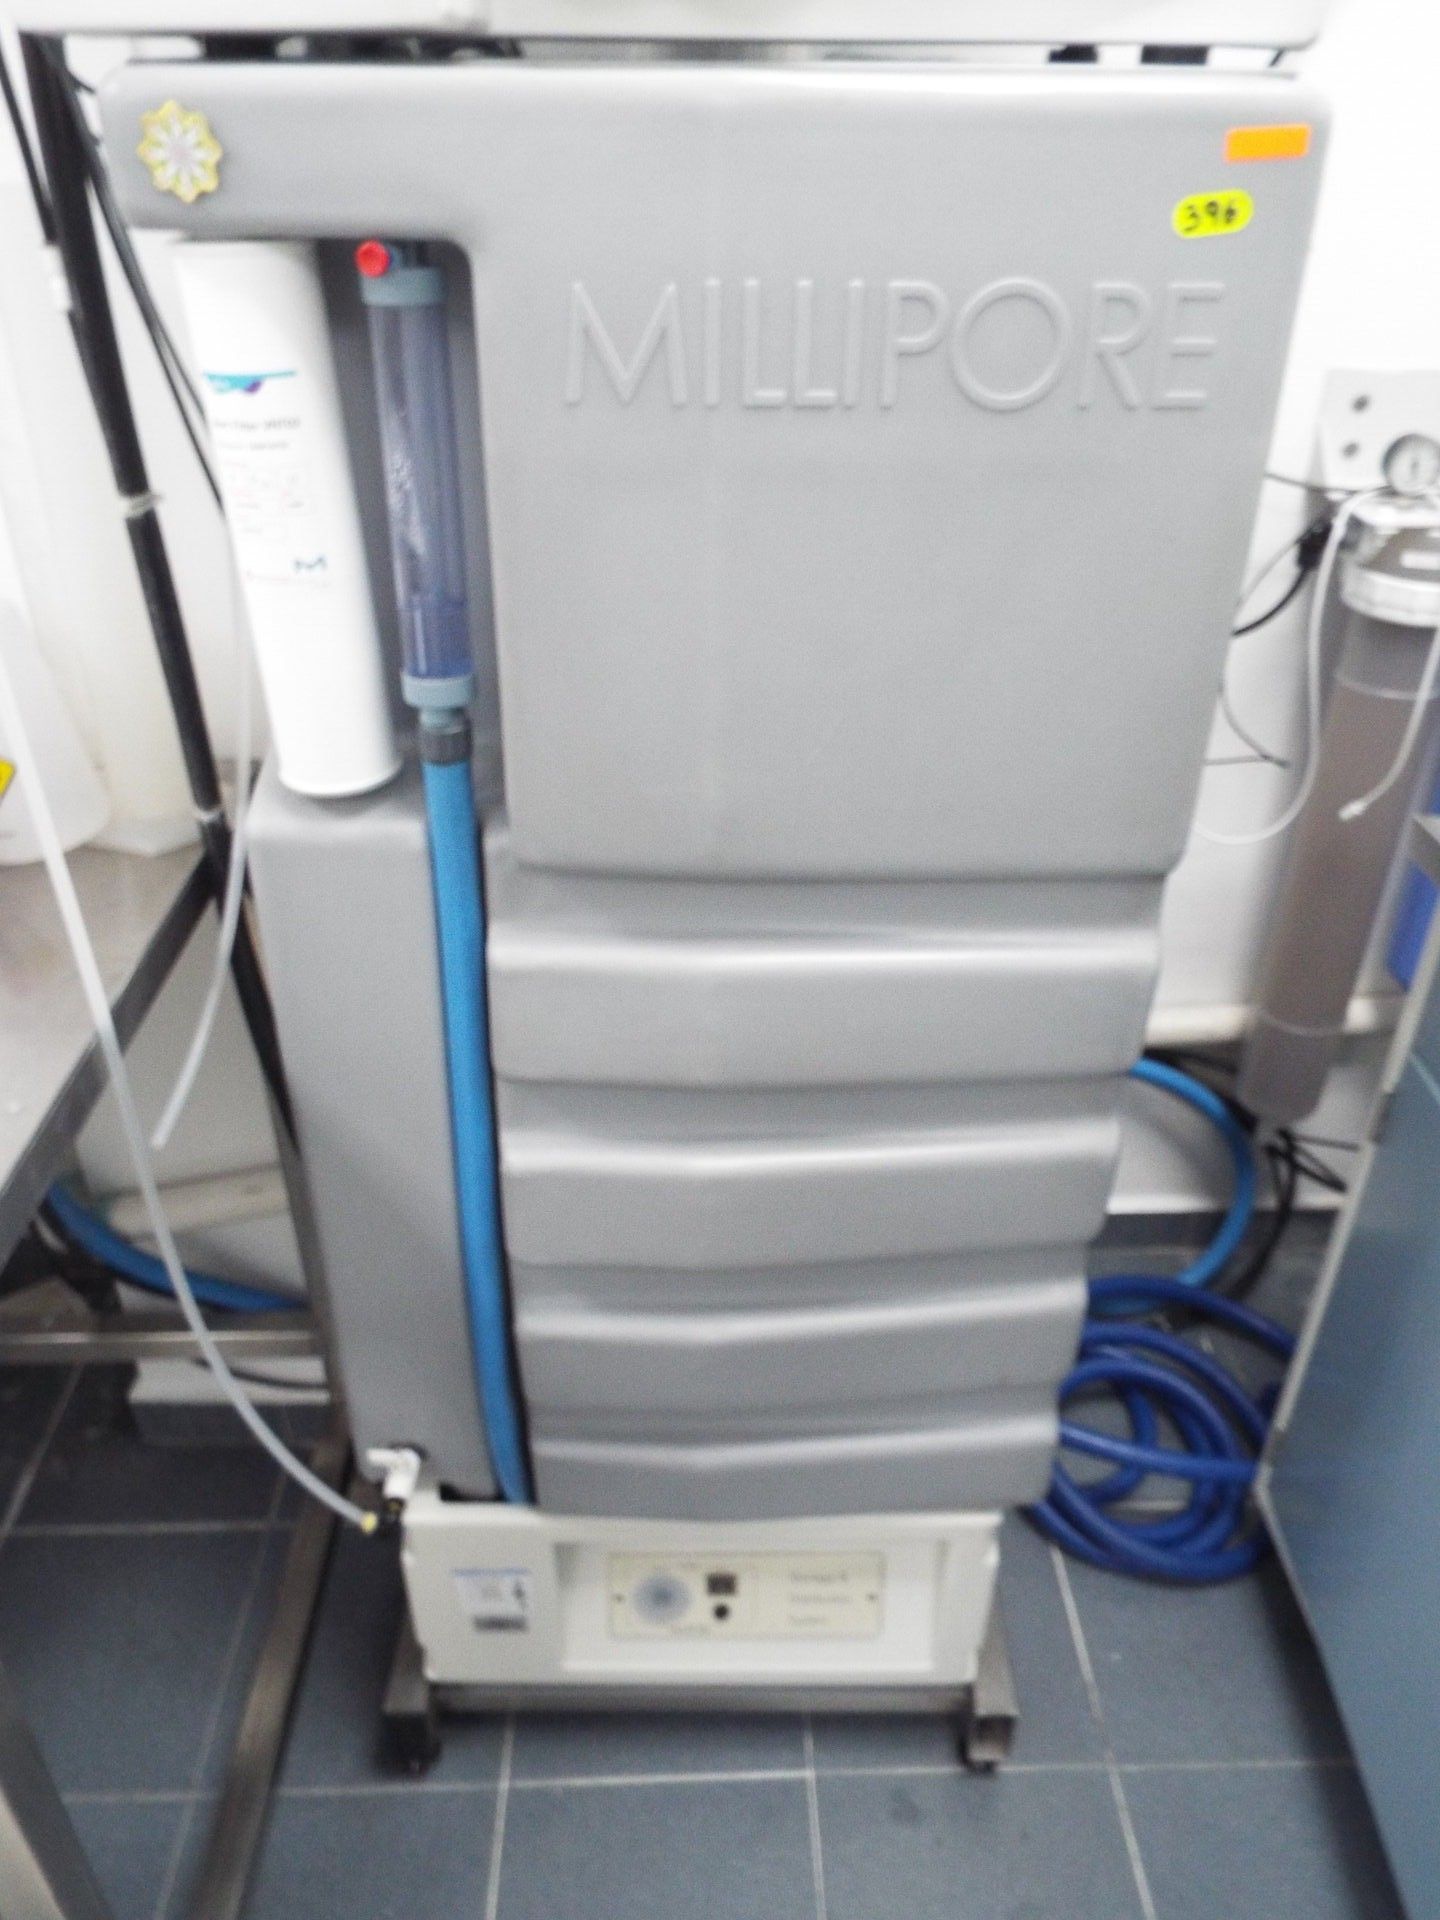 Millipore storage and distribution system